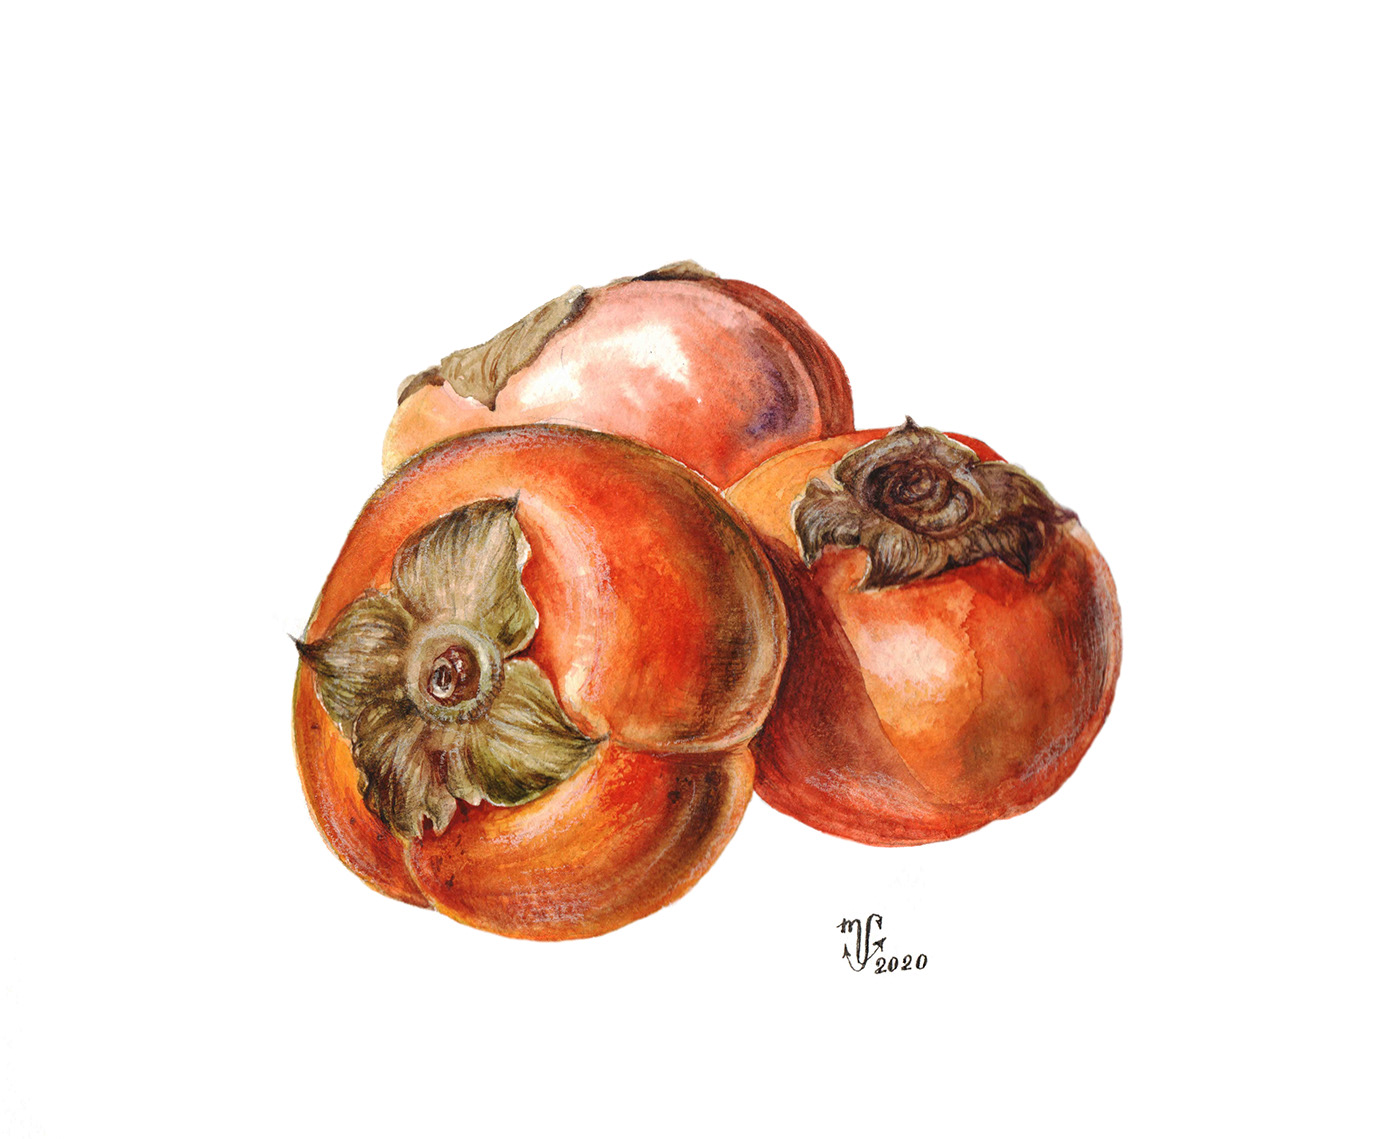 Persimmons. Watercolor on paper 21 x 29 cv, 2020